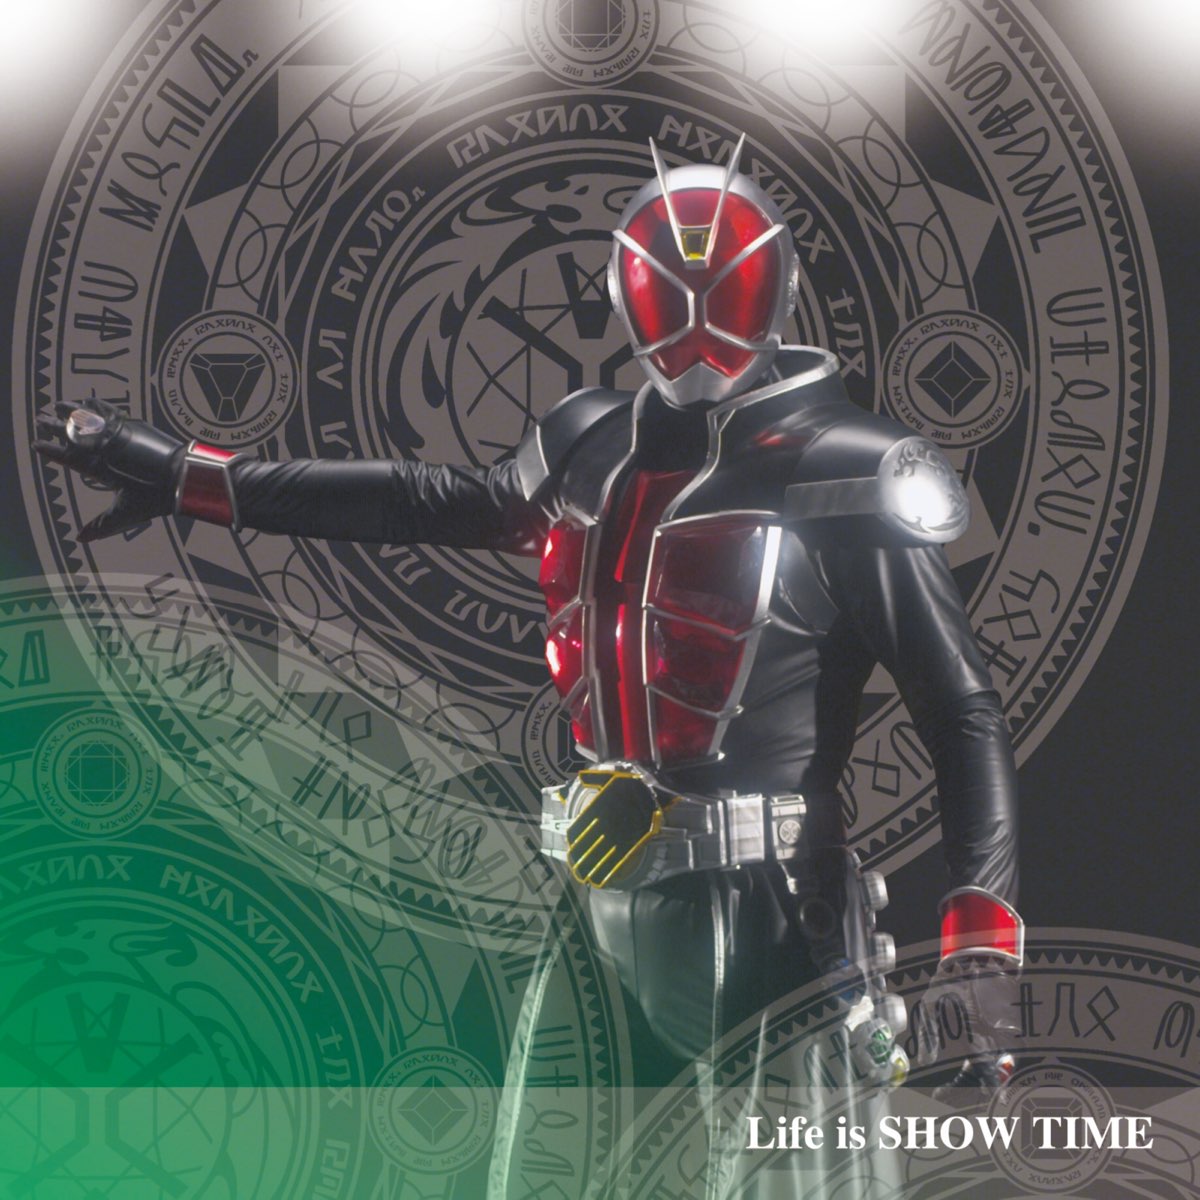 Life is SHOW TIME - Single - 鬼龍院翔 from ゴールデンボンバーのアルバム - Apple Music